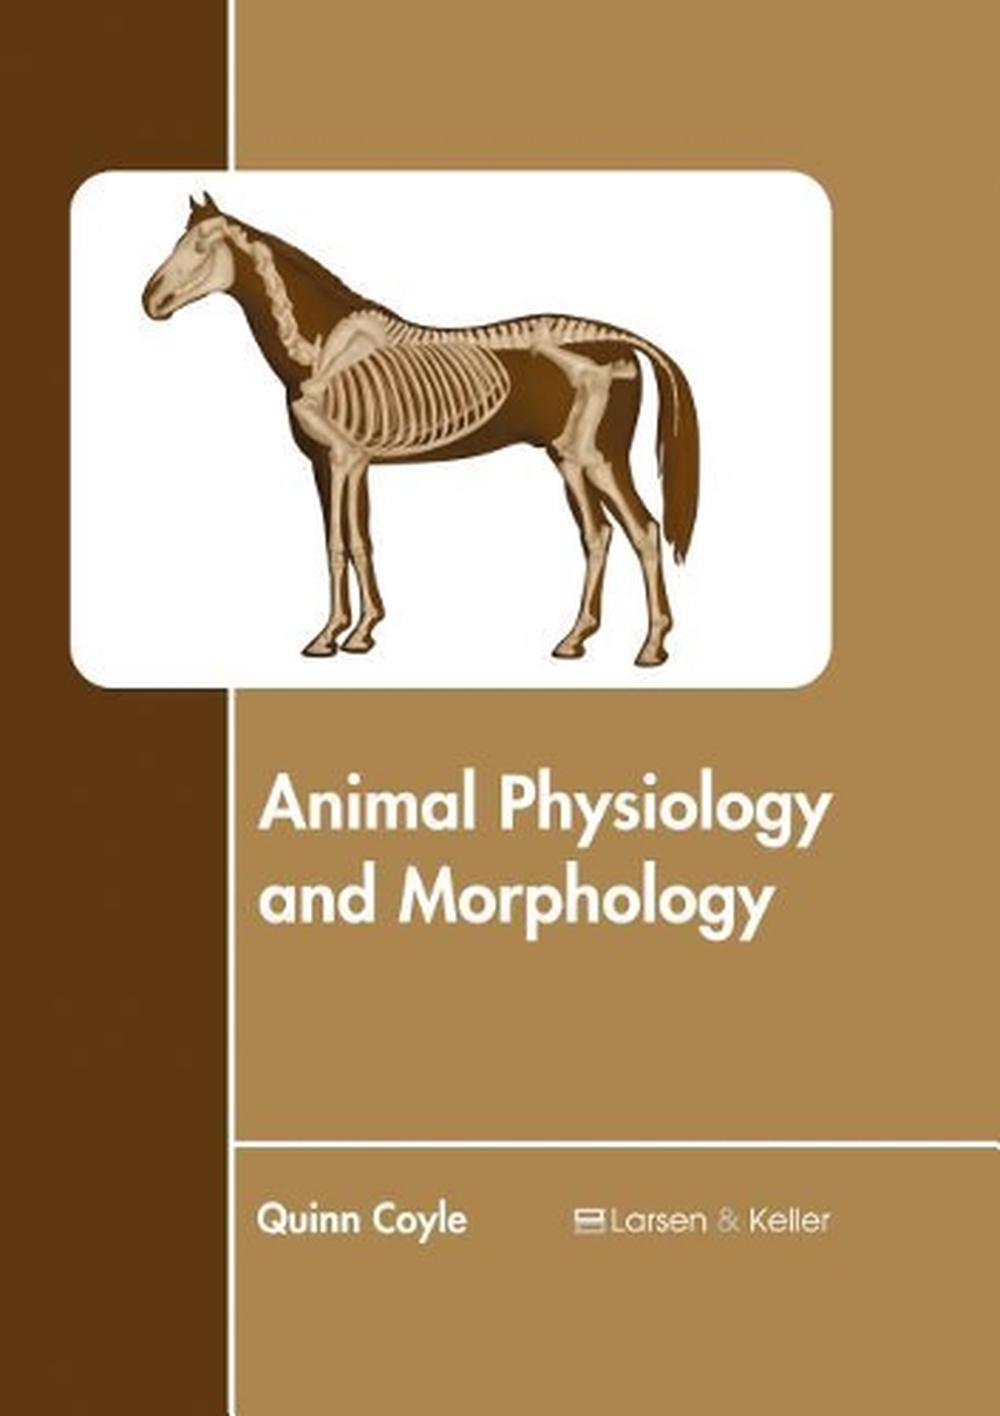 Animal Physiology and Morphology by Quinn Coyle (English) Hardcover ...